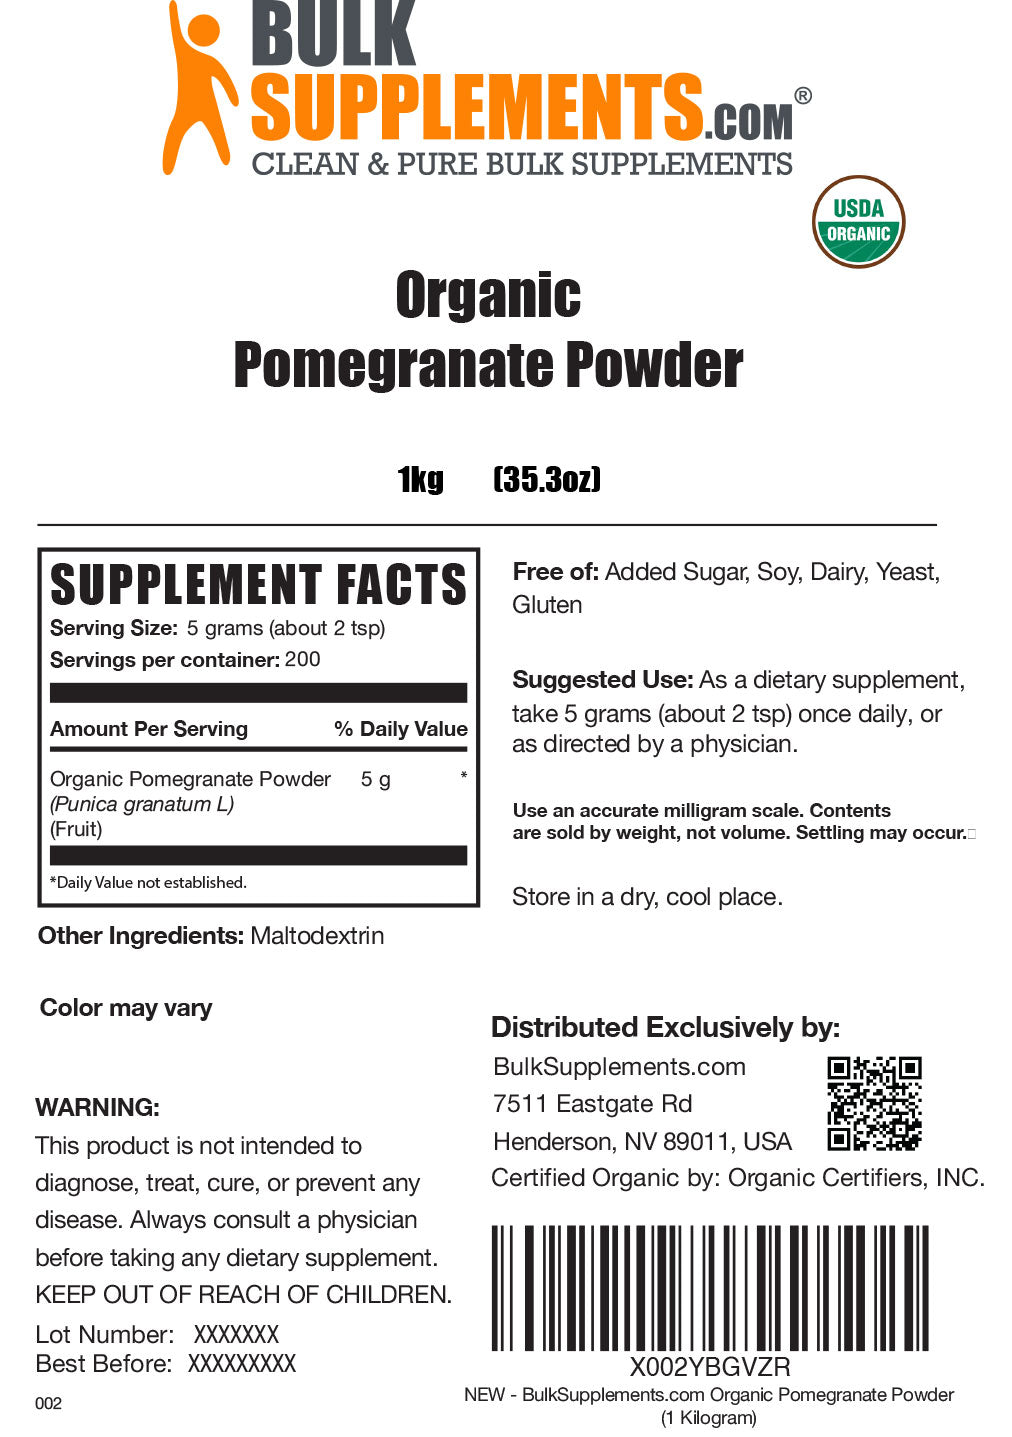 Supplement Facts for Organic Pomegranate Powder